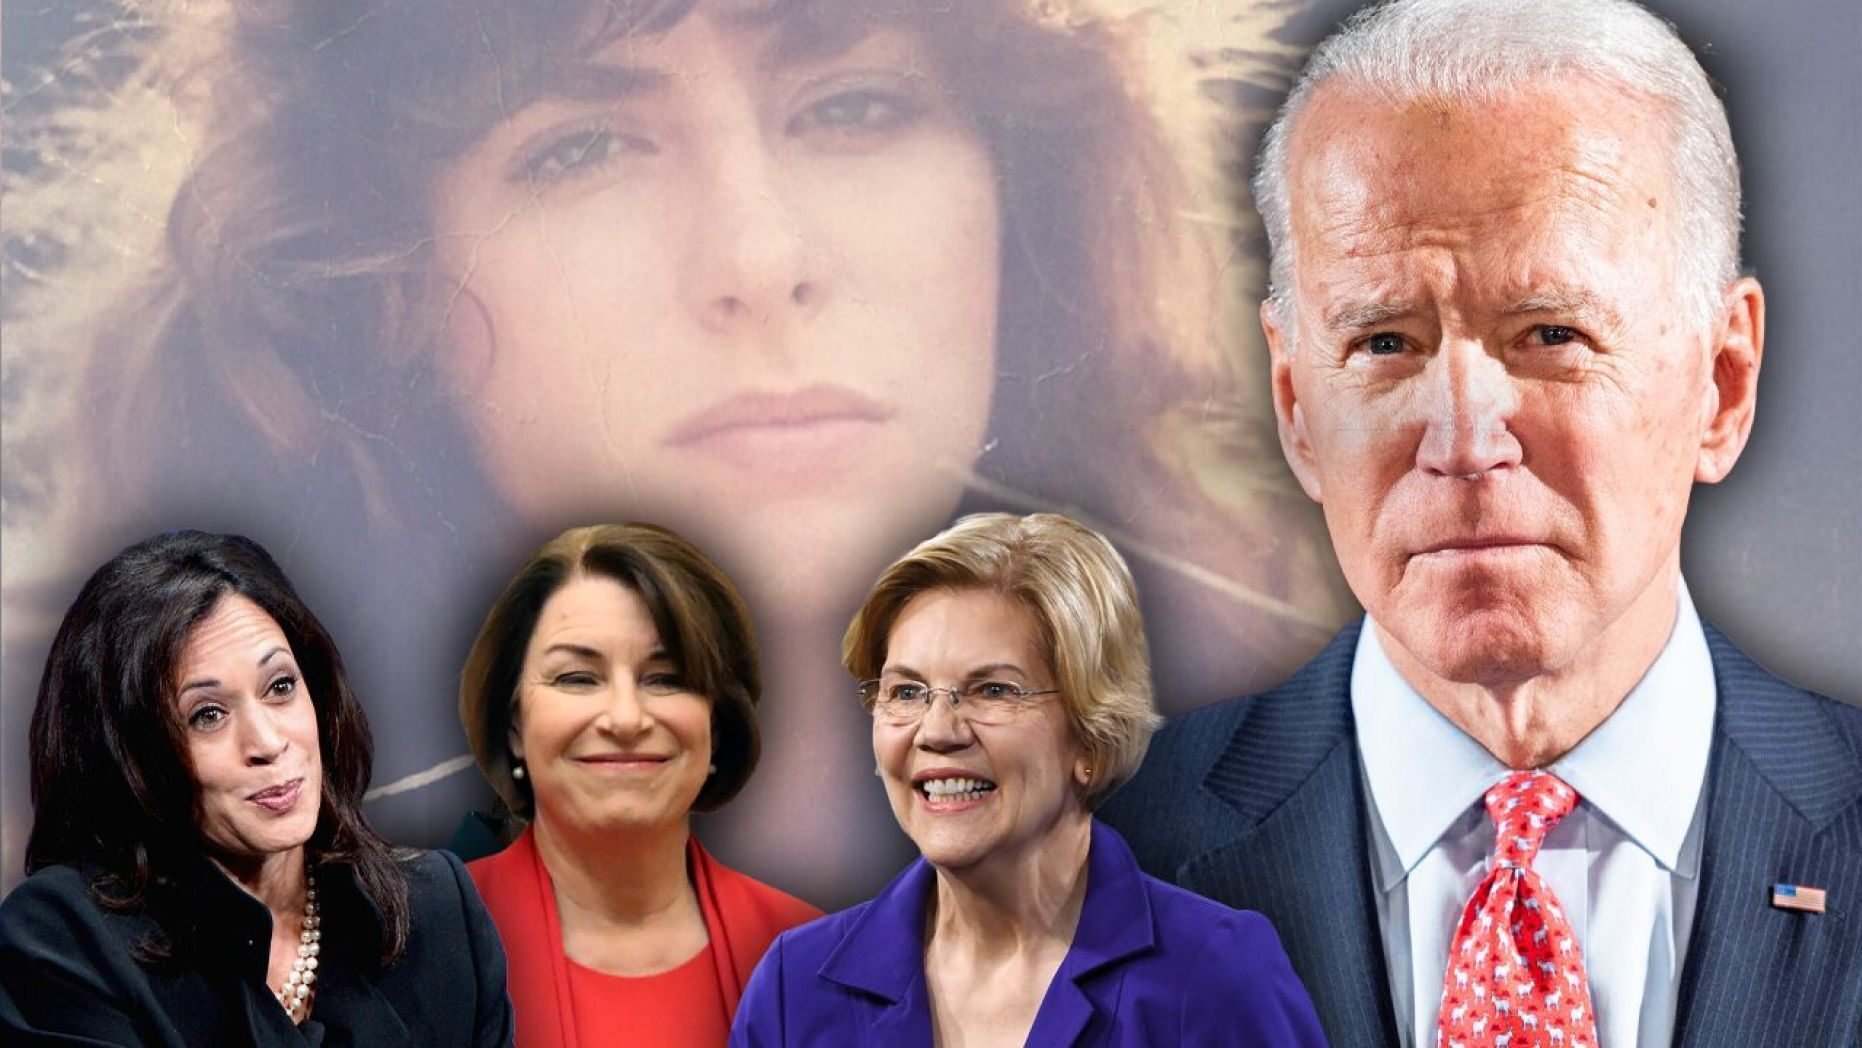 My two cents why the VP choices and MSM won't respond to the Biden alleged sexual assaults.